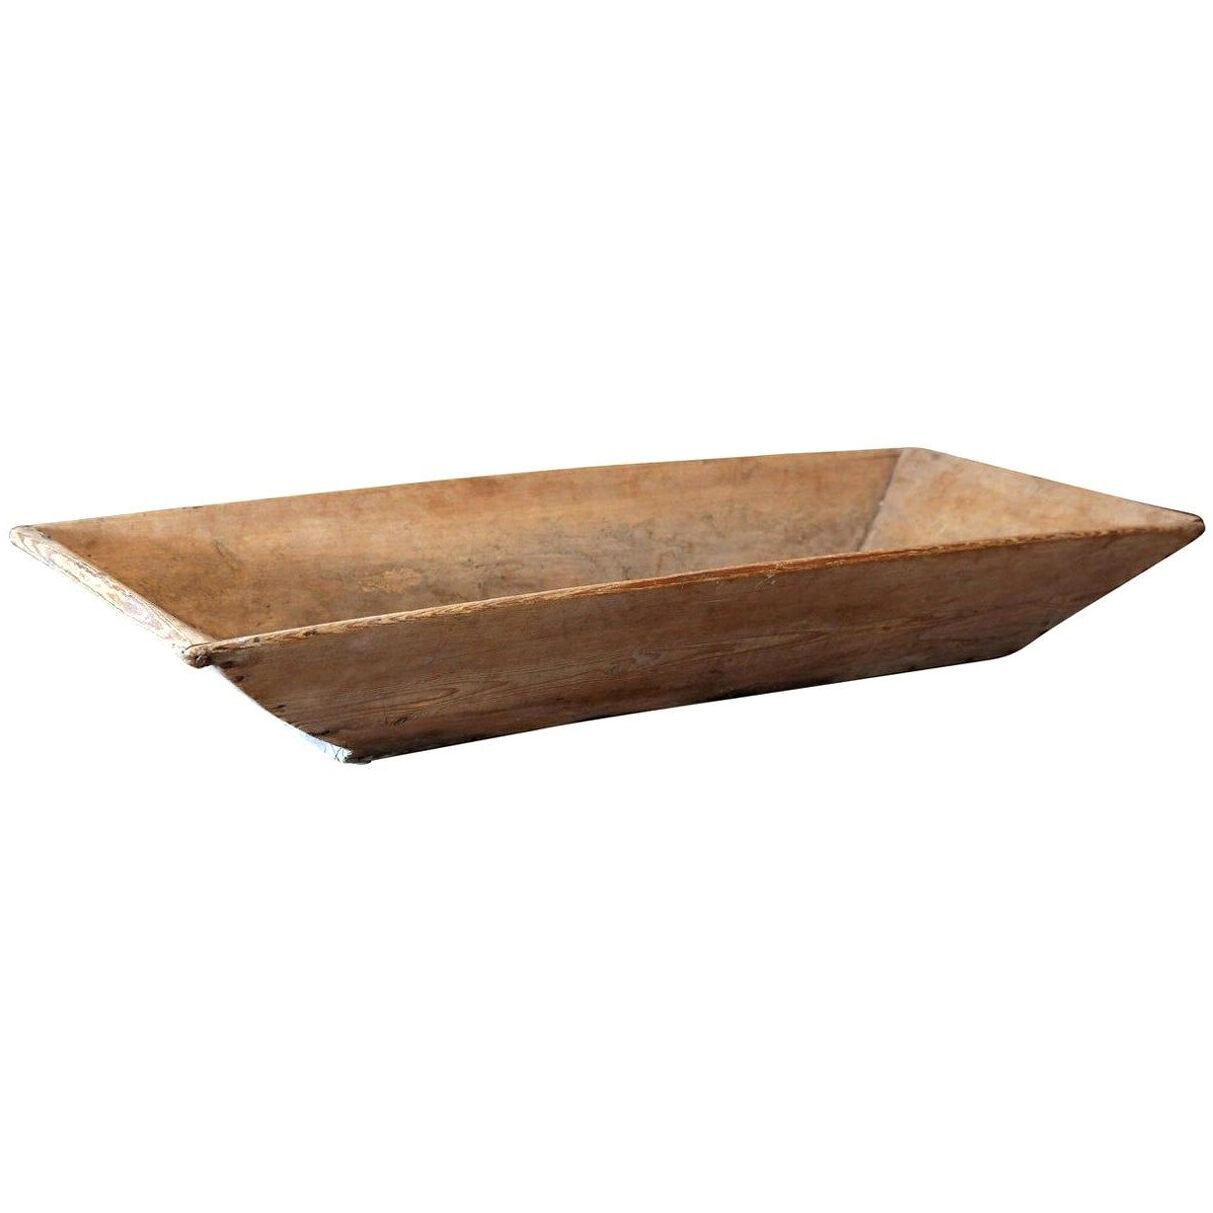 Large 19th Century Swedish Wooden Trencher Bowl